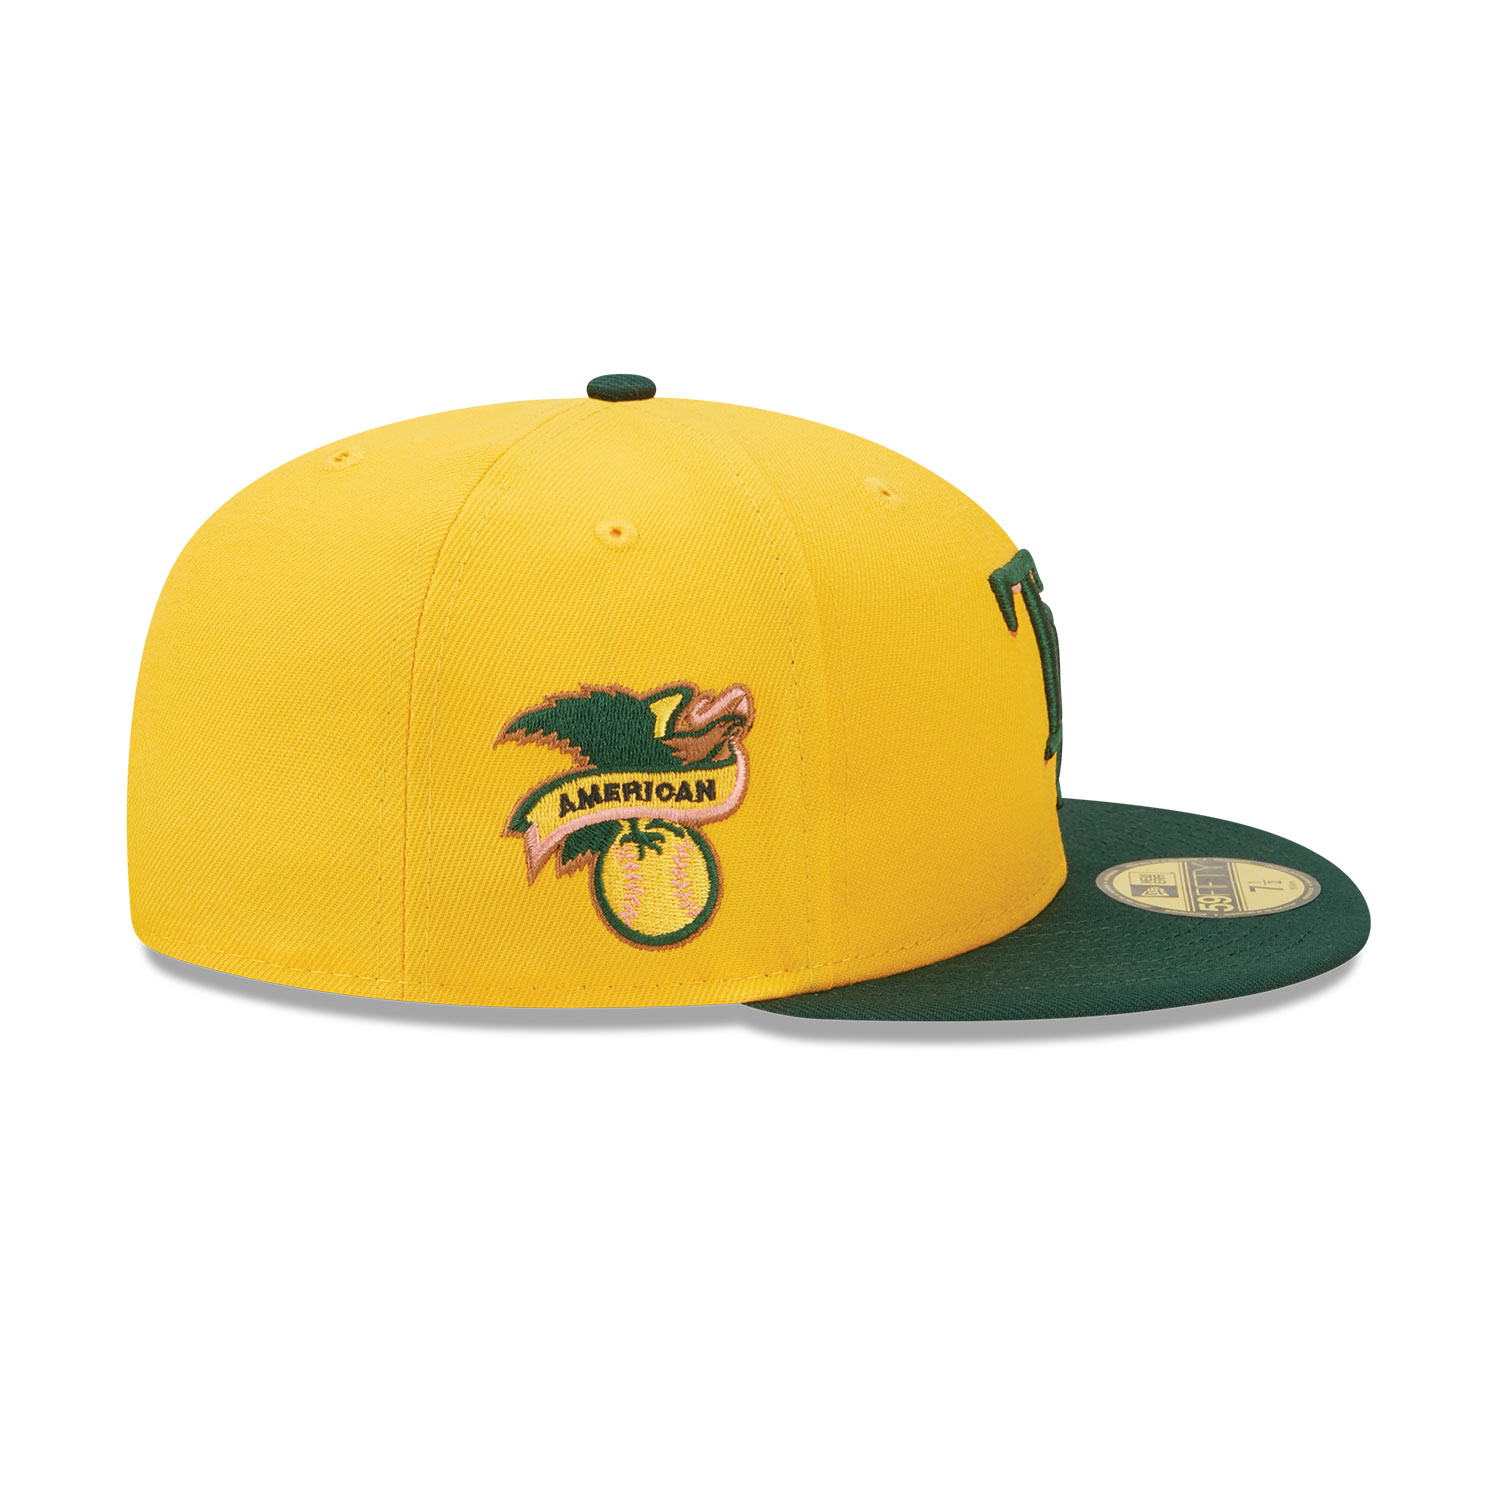 Tampa Bay Rays Back to School Yellow 59FIFTY Fitted Cap